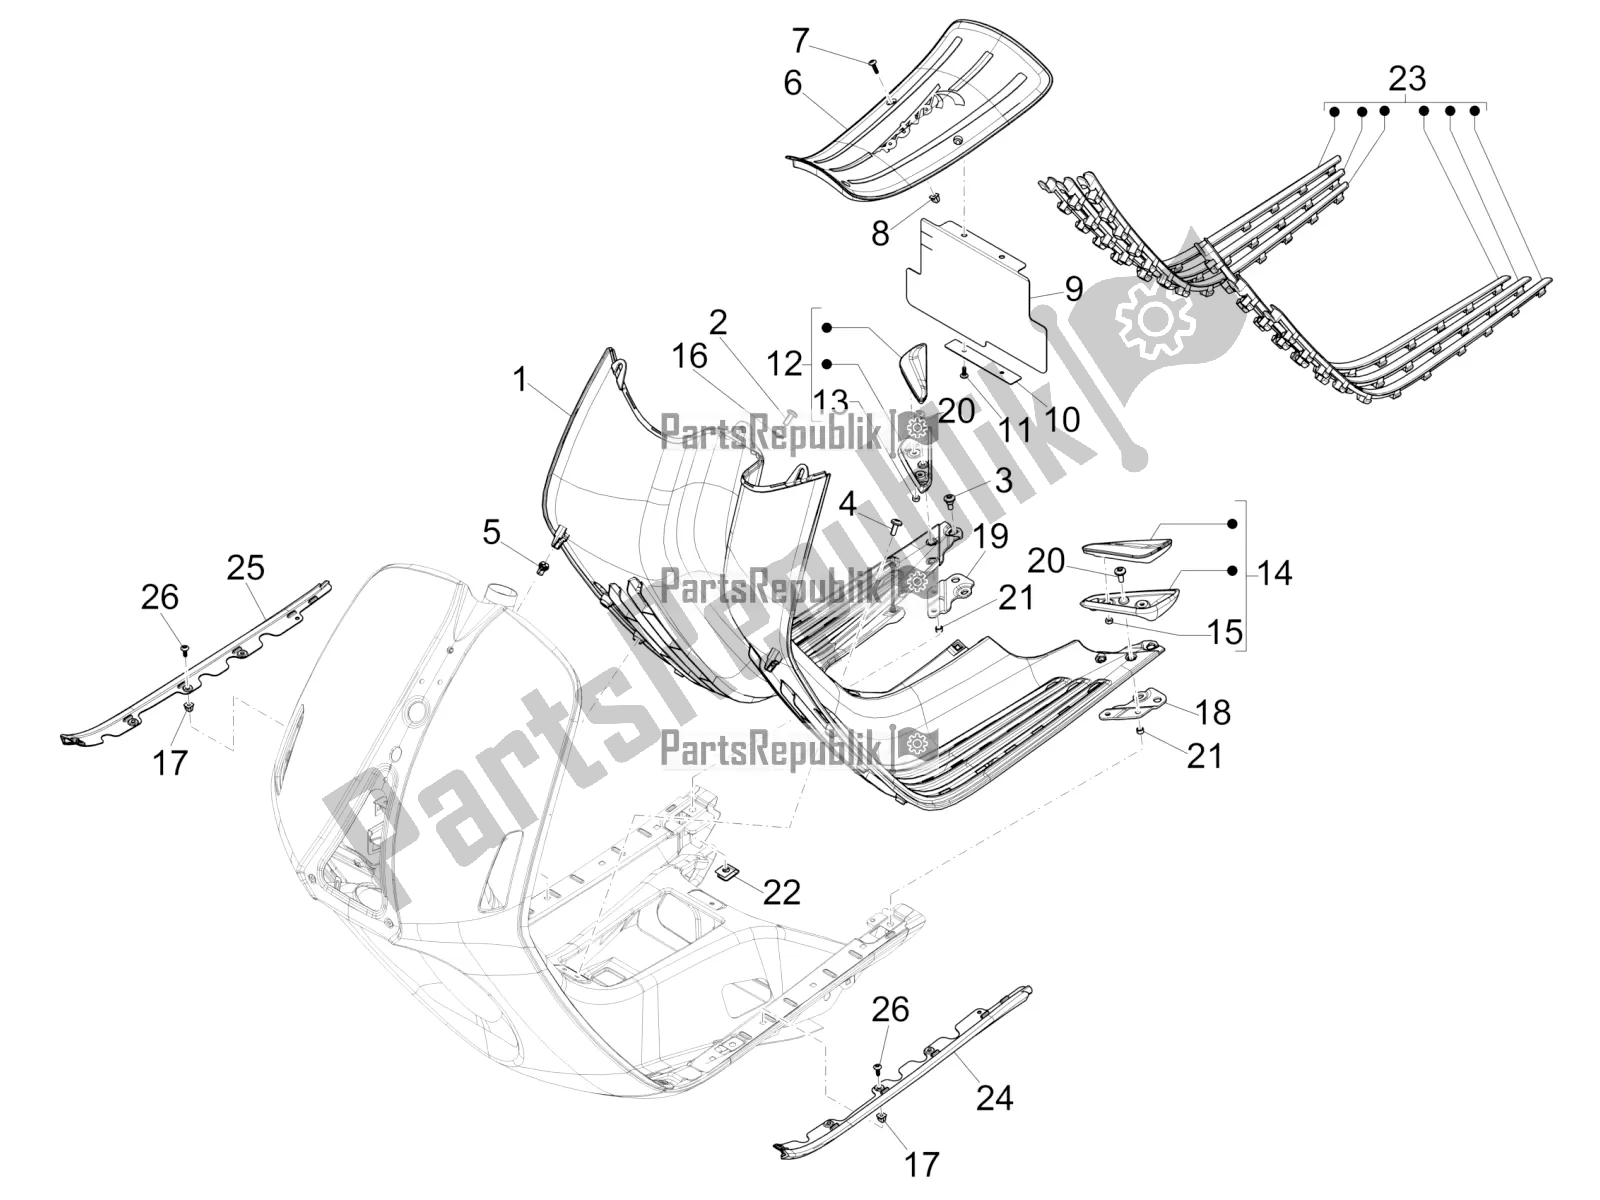 All parts for the Central Cover - Footrests of the Vespa 946 150 ABS CD Cina 2022